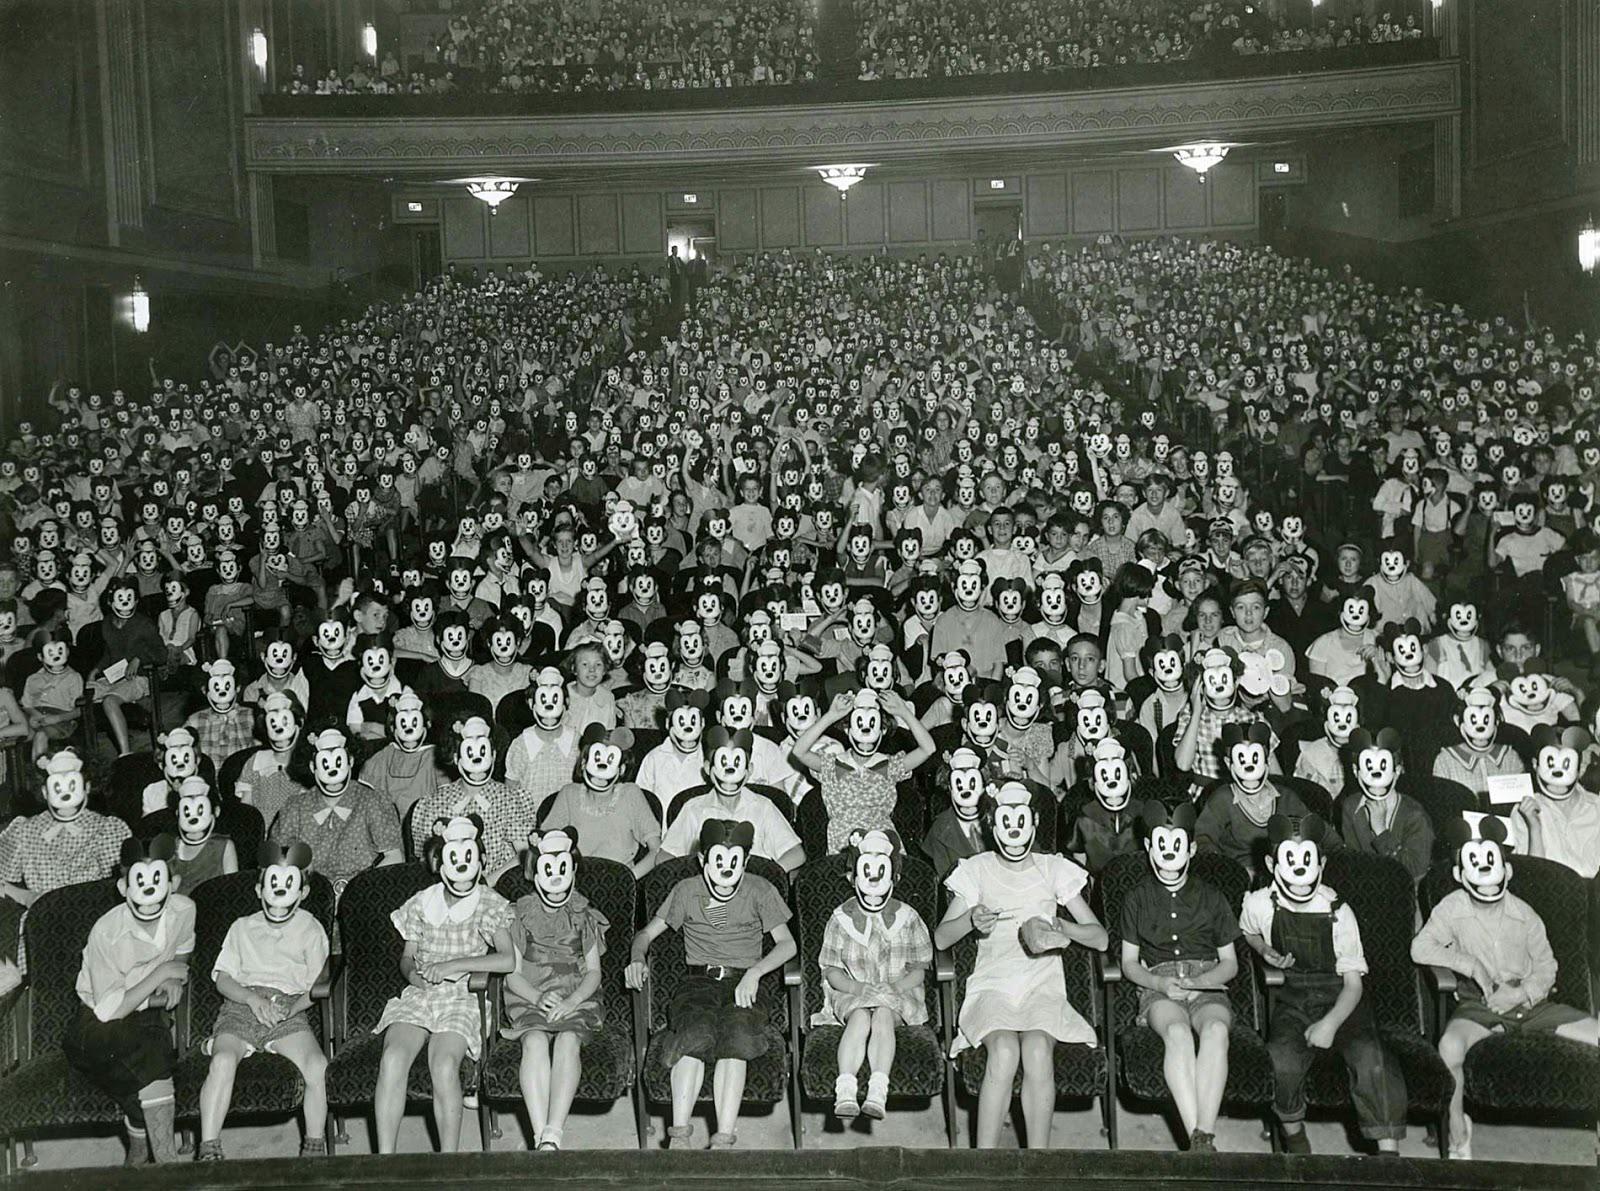 Mickey Mouse Club meeting 1930